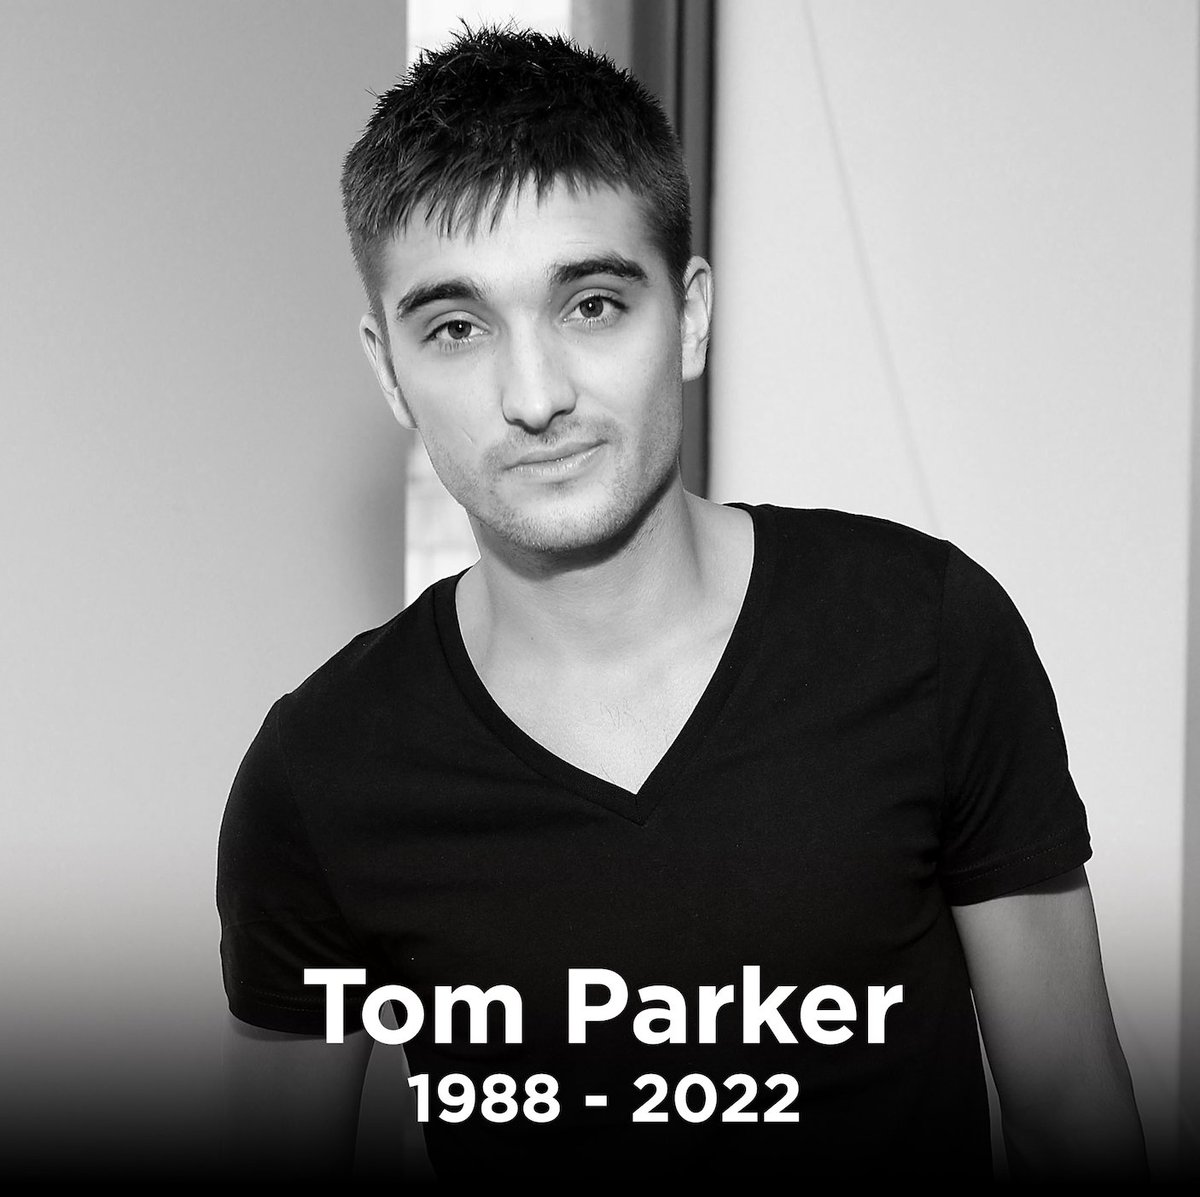 The Wanted's Tom Parker has tragically passed away at the age of 33, his wife Kelsey has announced. We are sending all our love to Tom's friends, family and of course the band during this difficult time. ❤️